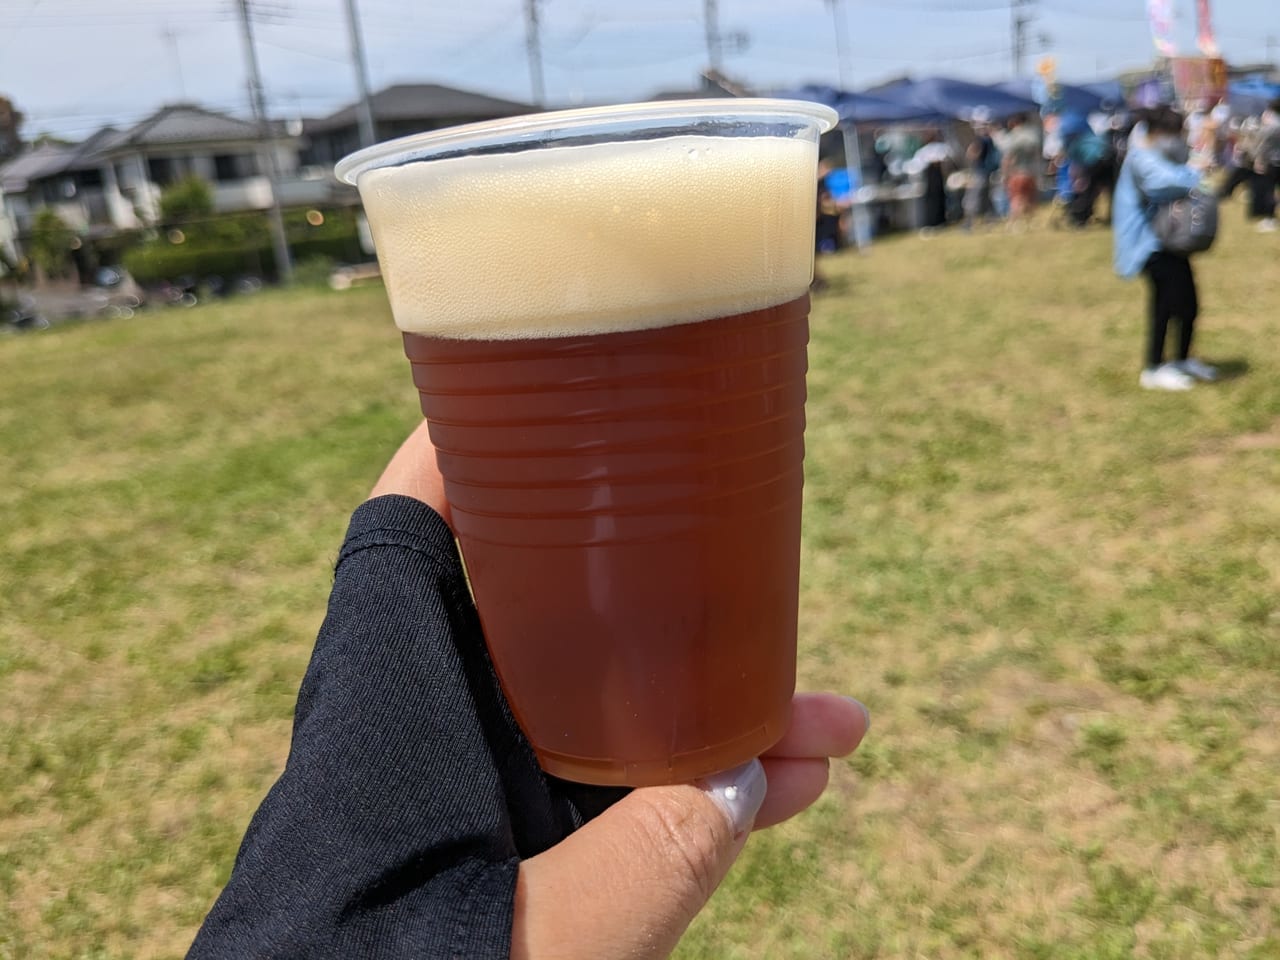 TOYODABEERFES2023